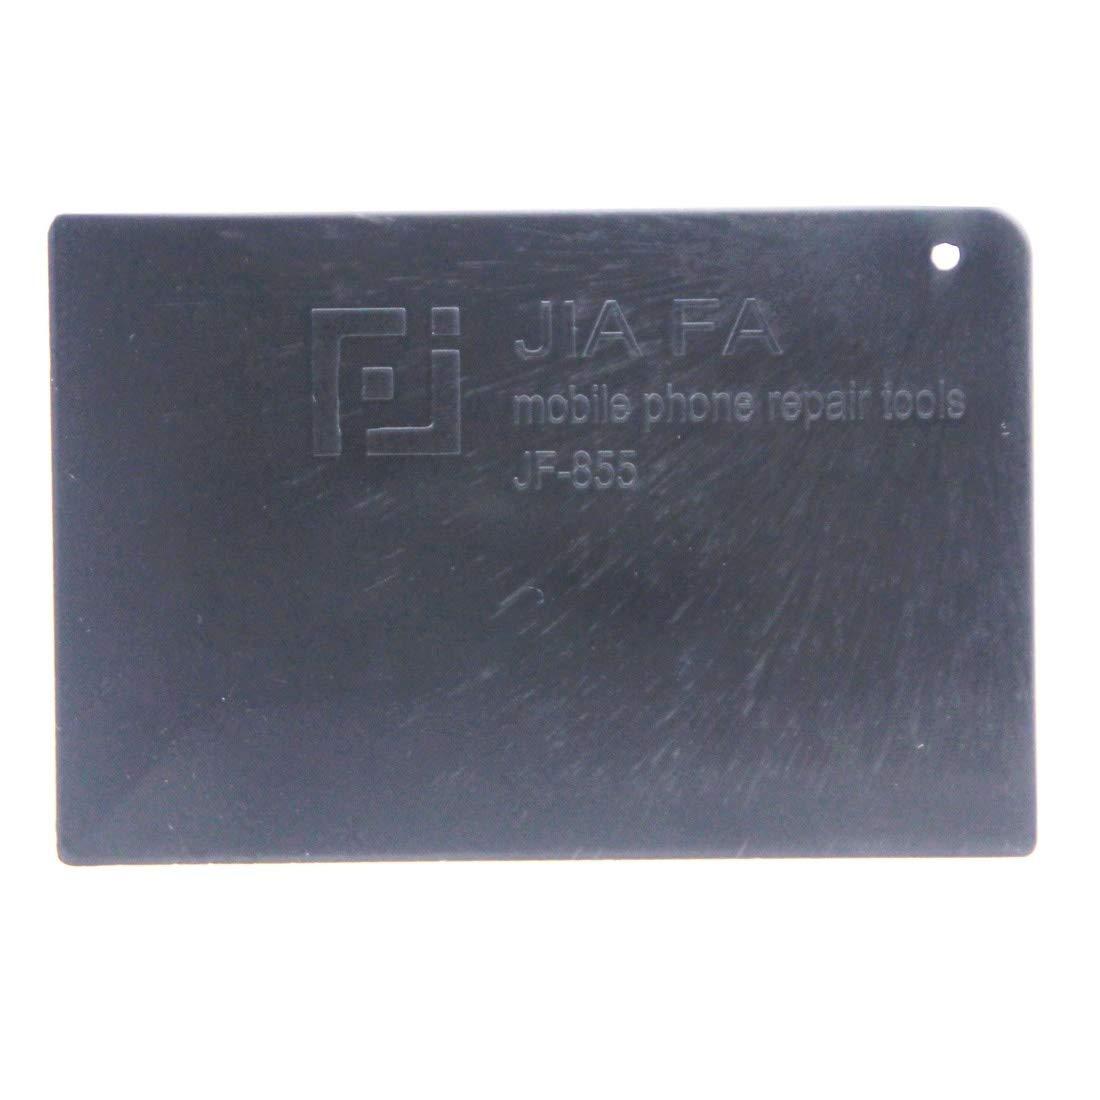 JF-855 pry bar for removing the battery in a phone or tablet